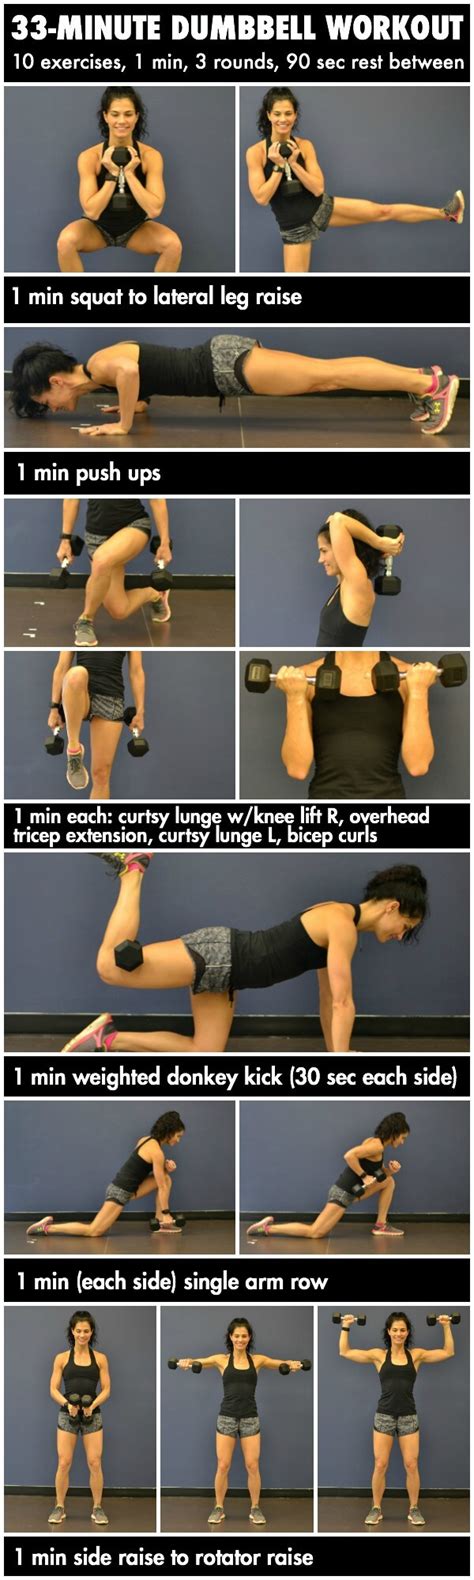 33 Minute Total Body Dumbbell Workout